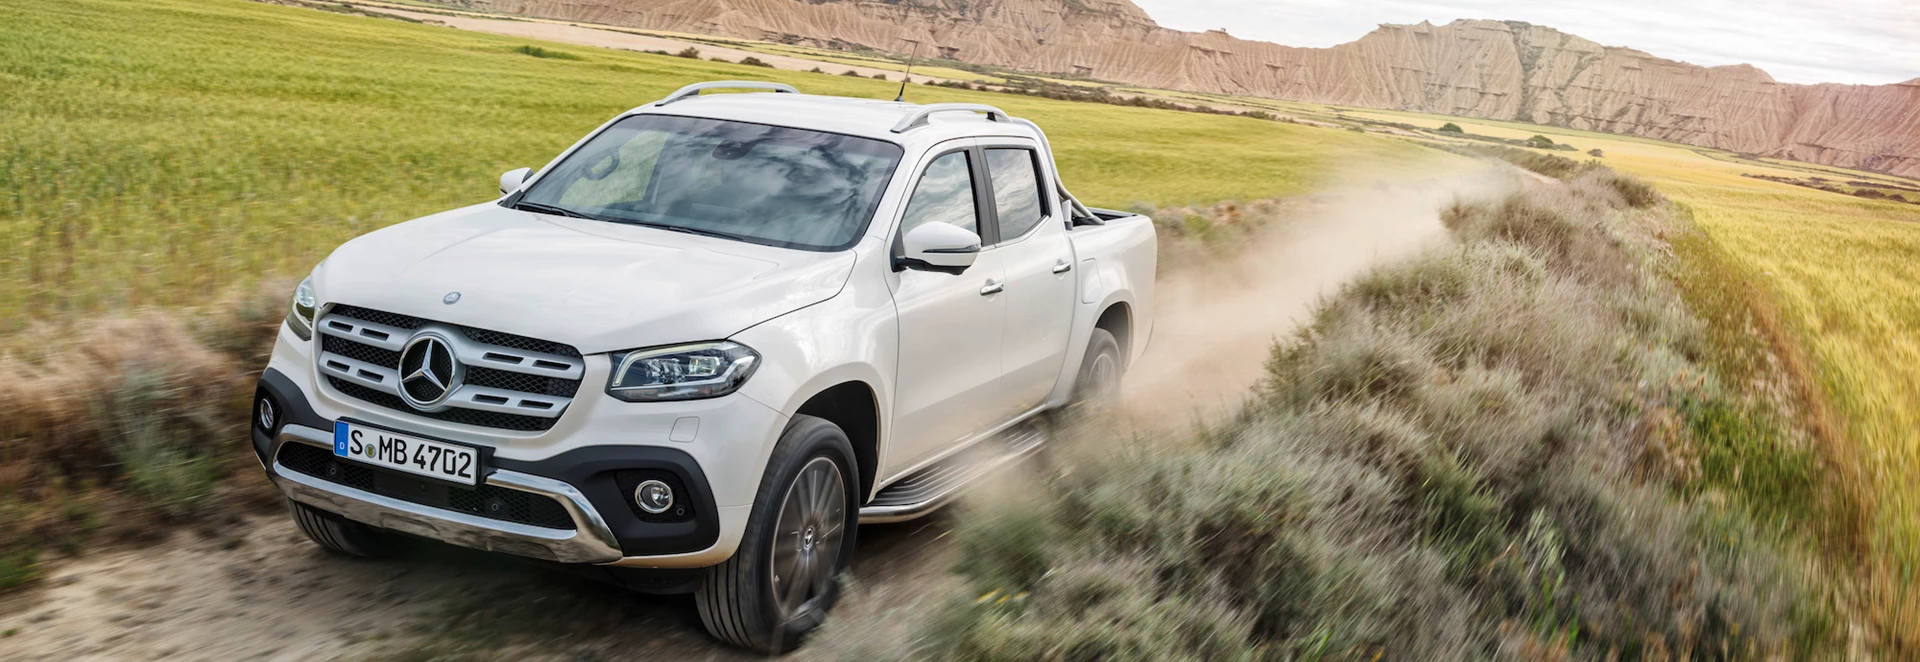 Mercedes-Benz reveals specification for X-Class pick-up 